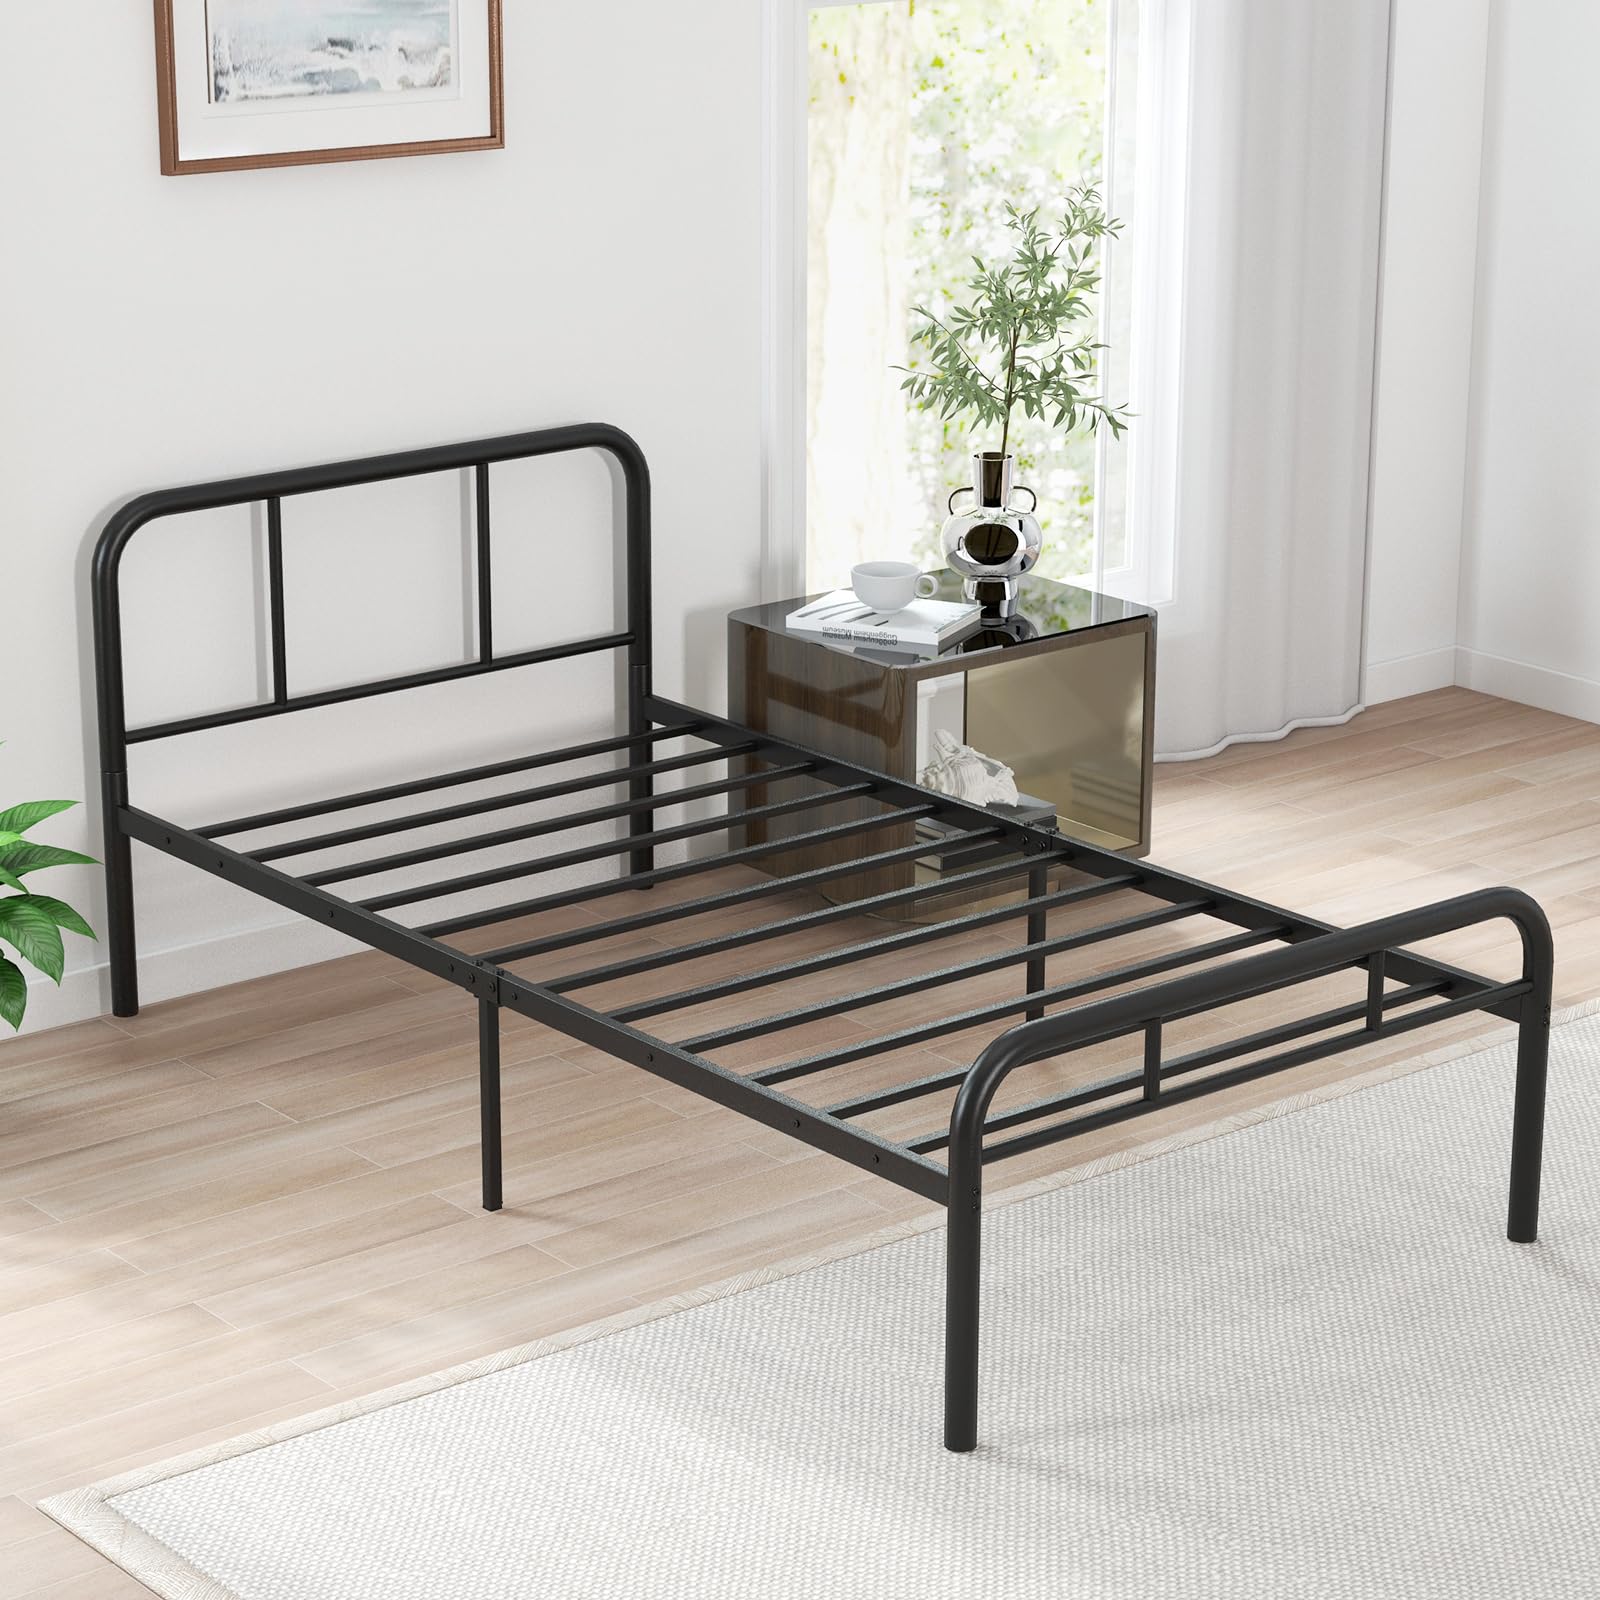 Giantex Twin Size Bed Frame, Modern Metal Platform Bed with Headboard and Footboard, Heavy Duty Steel Slat Support Mattress Foundation